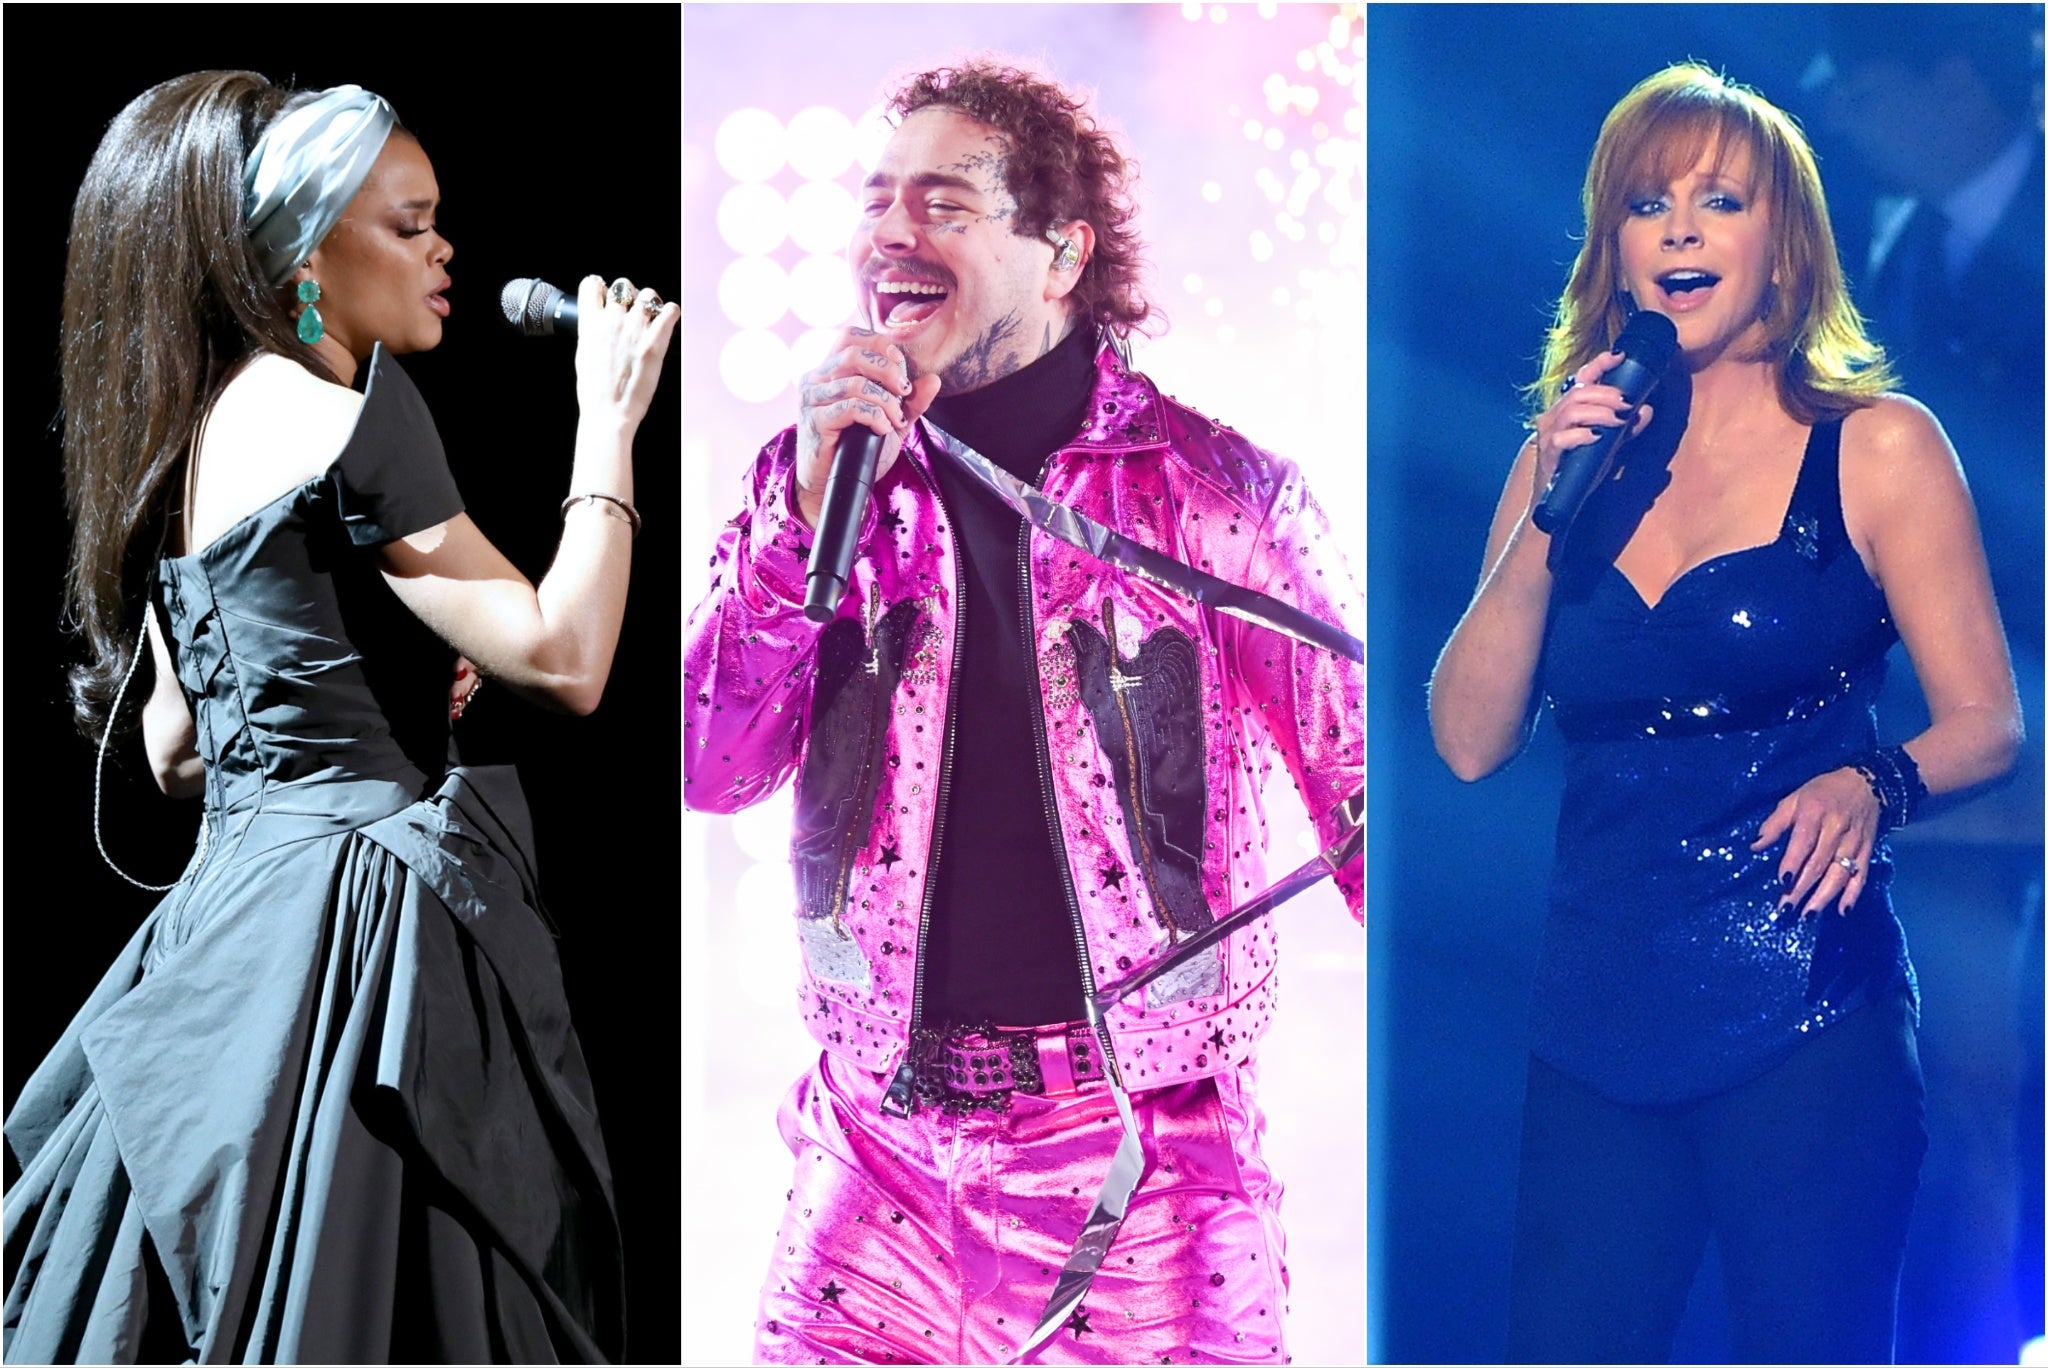 Andra Day, Post Malone and Reba McEntire are performing at this year’s Super Bowl